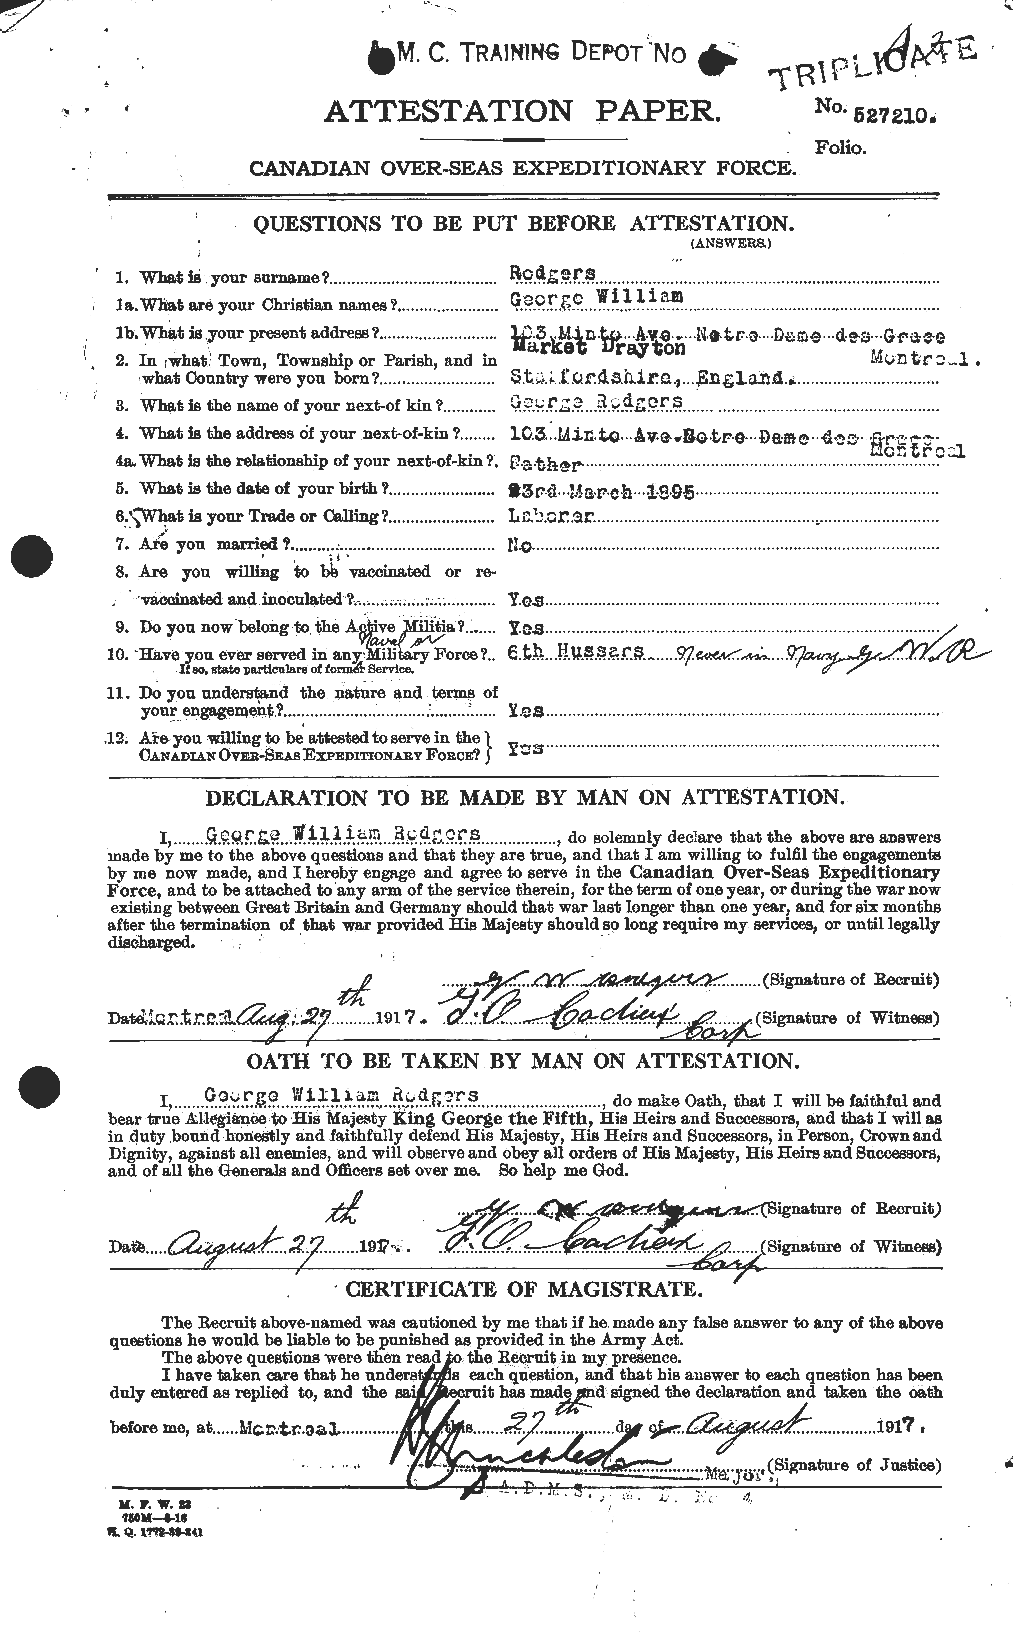 Personnel Records of the First World War - CEF 610403a